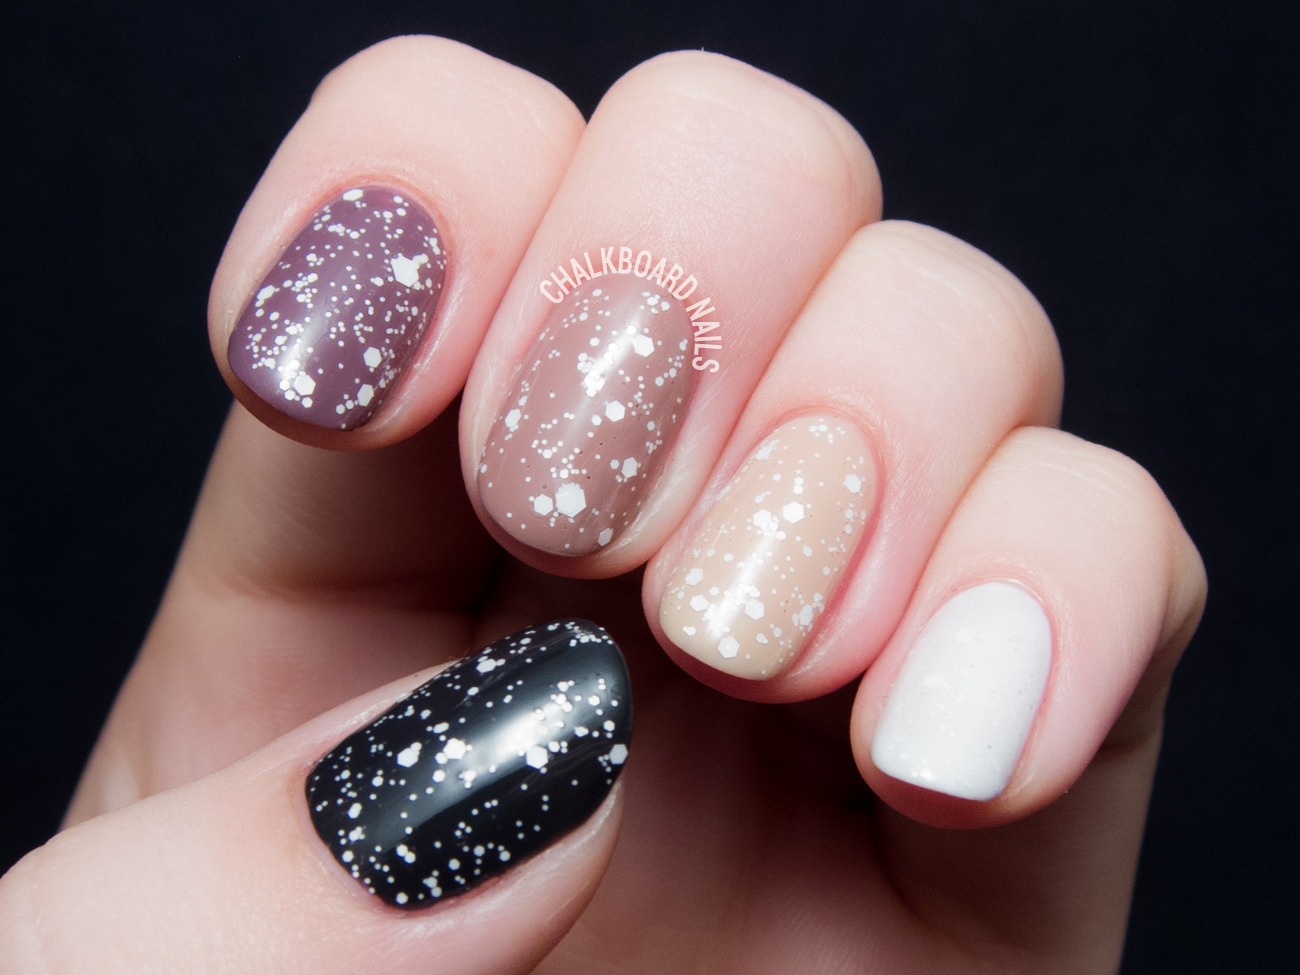 Ombre nails with lace glitter by @chalkboardnails